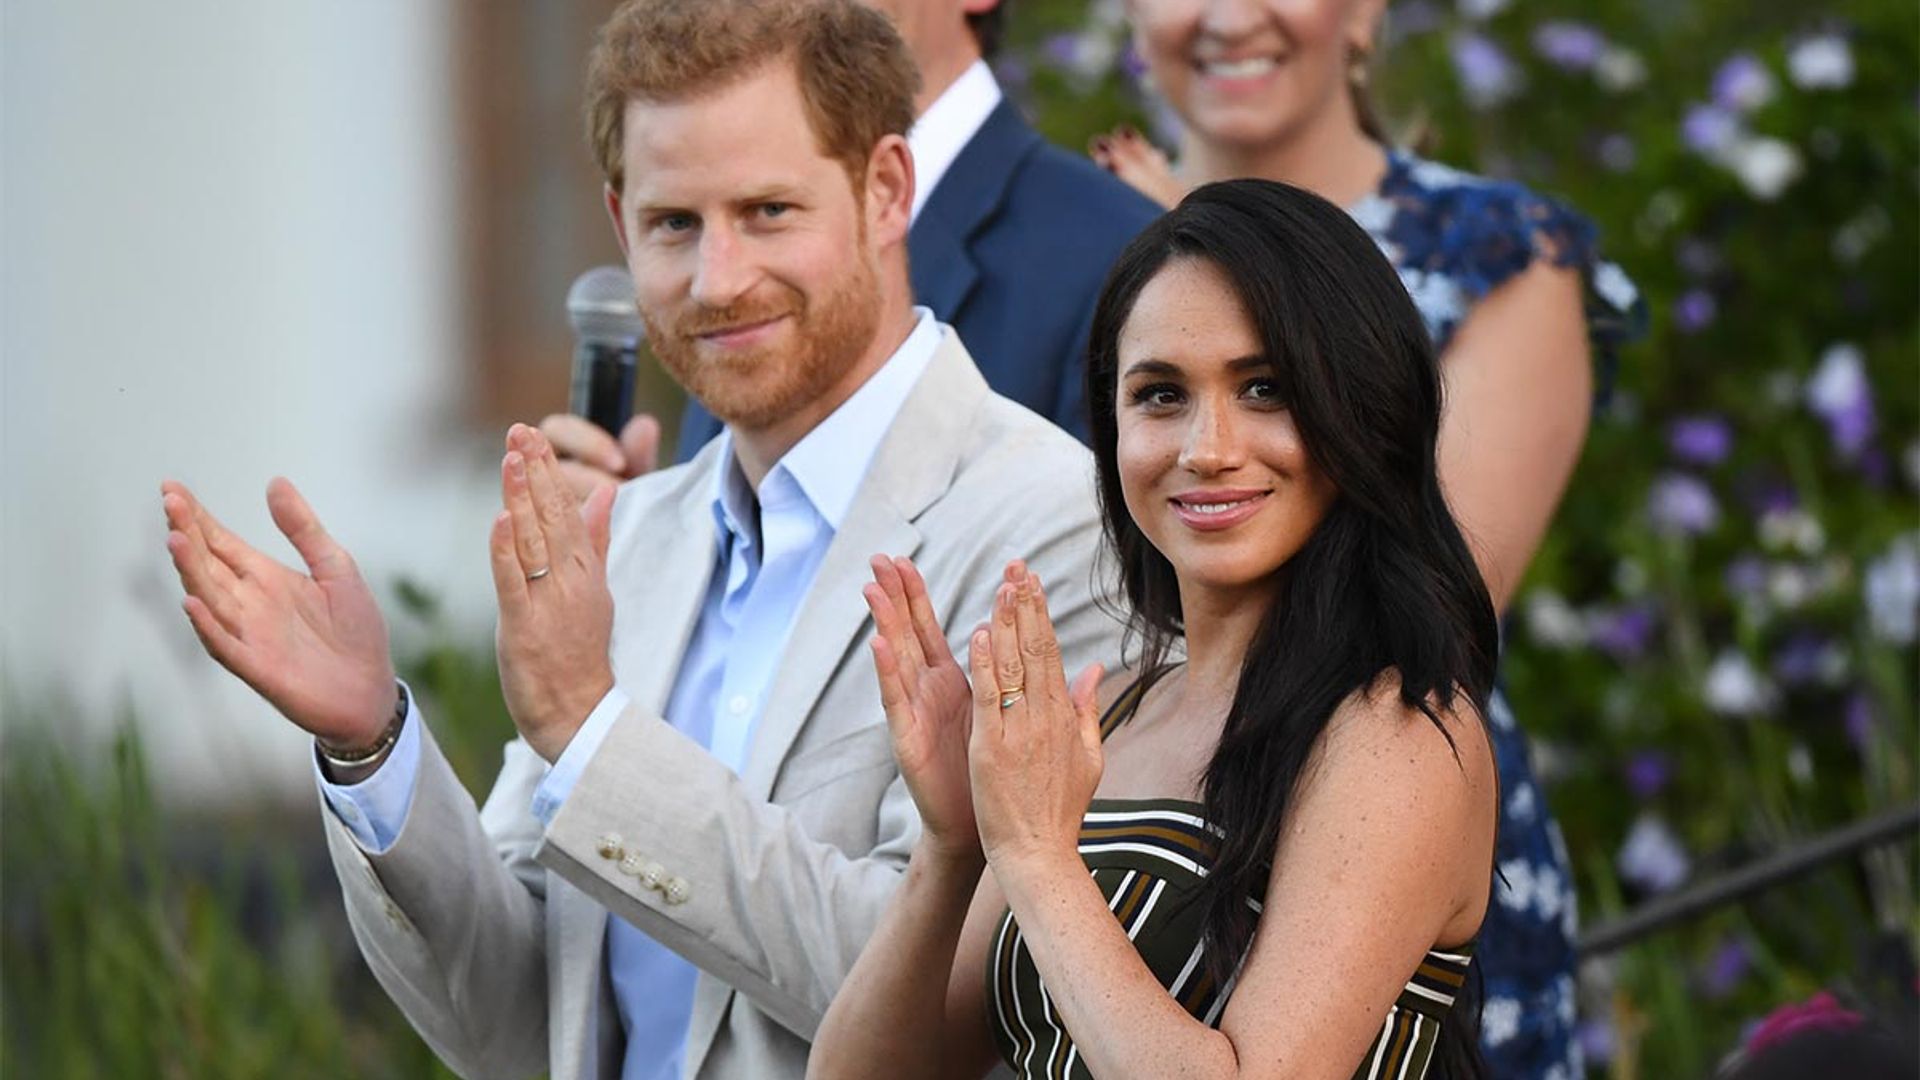 Why November is a special month for Prince Harry and Meghan Markle